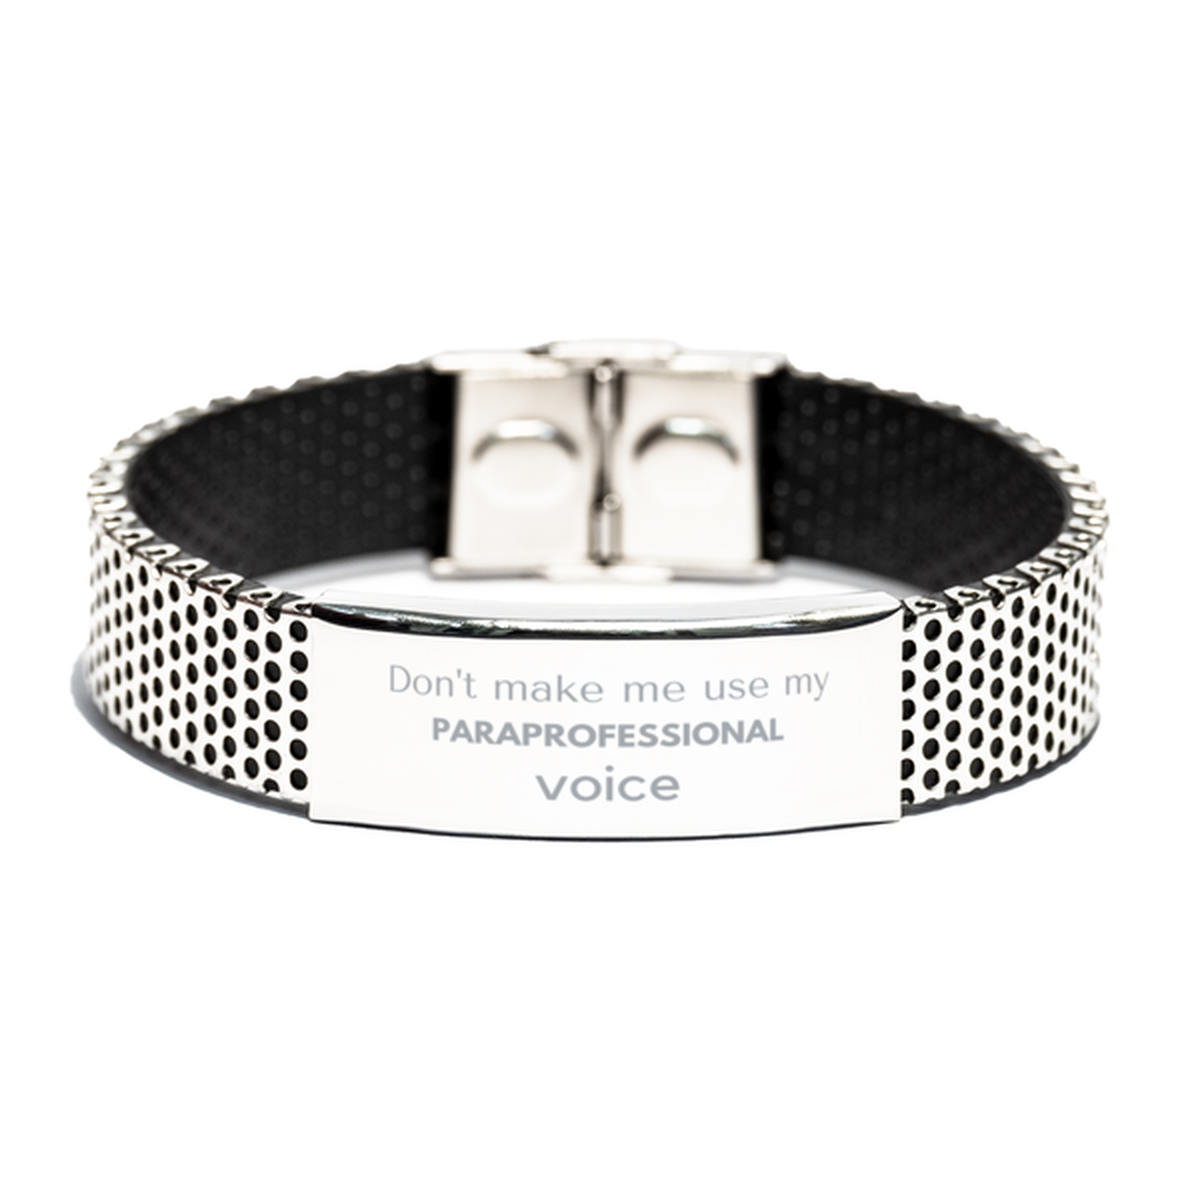 Don't make me use my Paraprofessional voice, Sarcasm Paraprofessional Gifts, Christmas Paraprofessional Stainless Steel Bracelet Birthday Unique Gifts For Paraprofessional Coworkers, Men, Women, Colleague, Friends